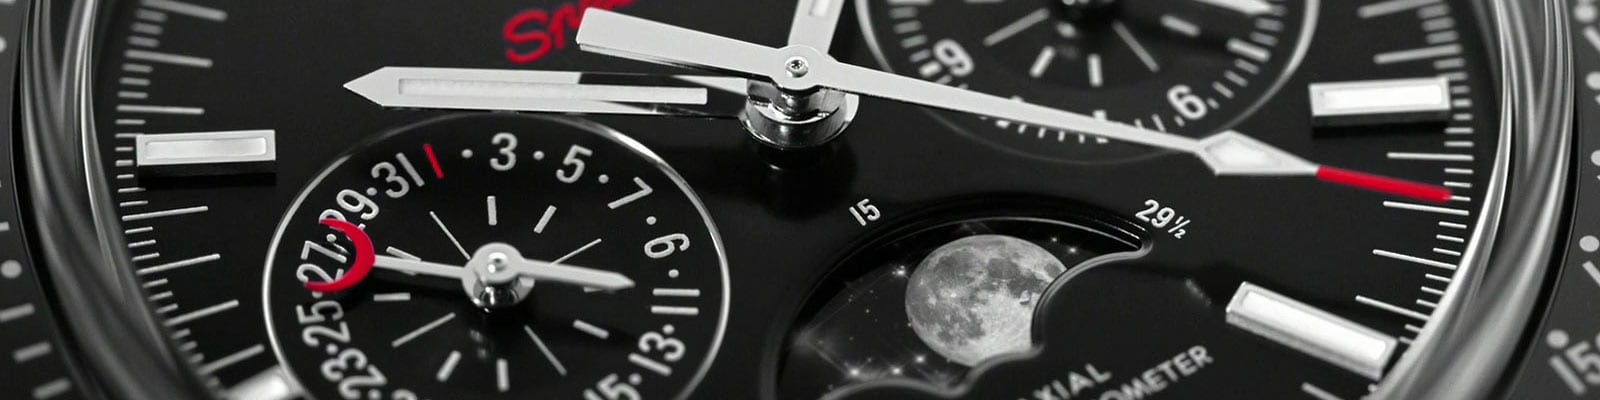 Brm Watches Replica